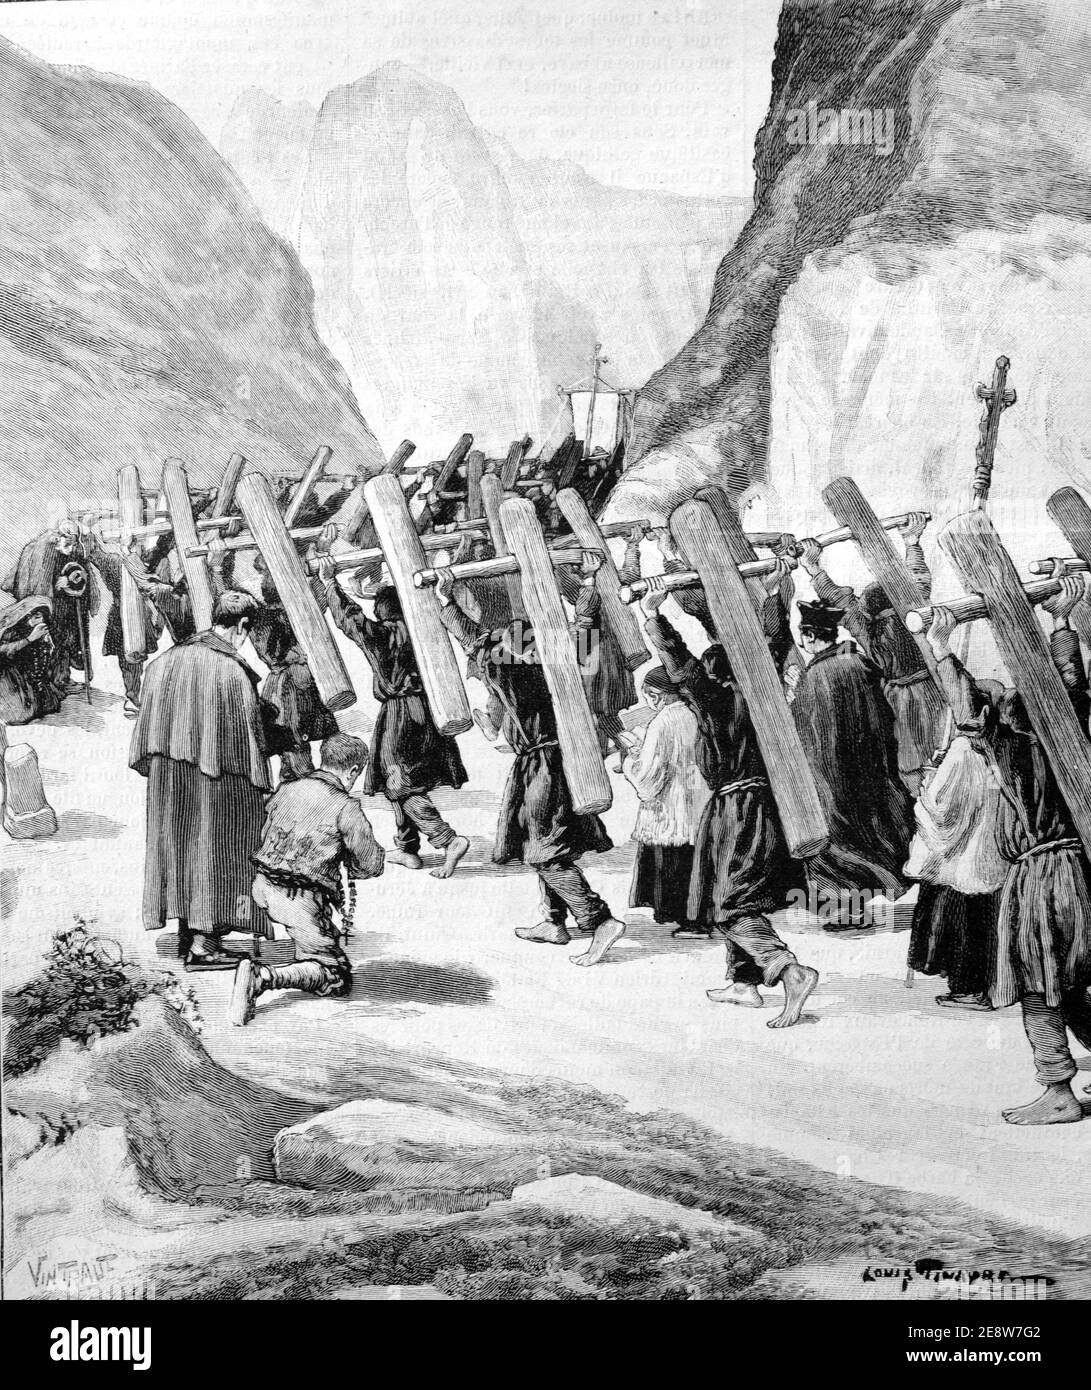 Pilgrim Penitents or Catholic Christian Pilgrims Carrying Wooden Crosses on the French Way Path, part of the Way of Saint James Path to Santiago de Compestela, Rocesvalles Navarre Spain 1901 Vintage Illustration or Engraving Stock Photo